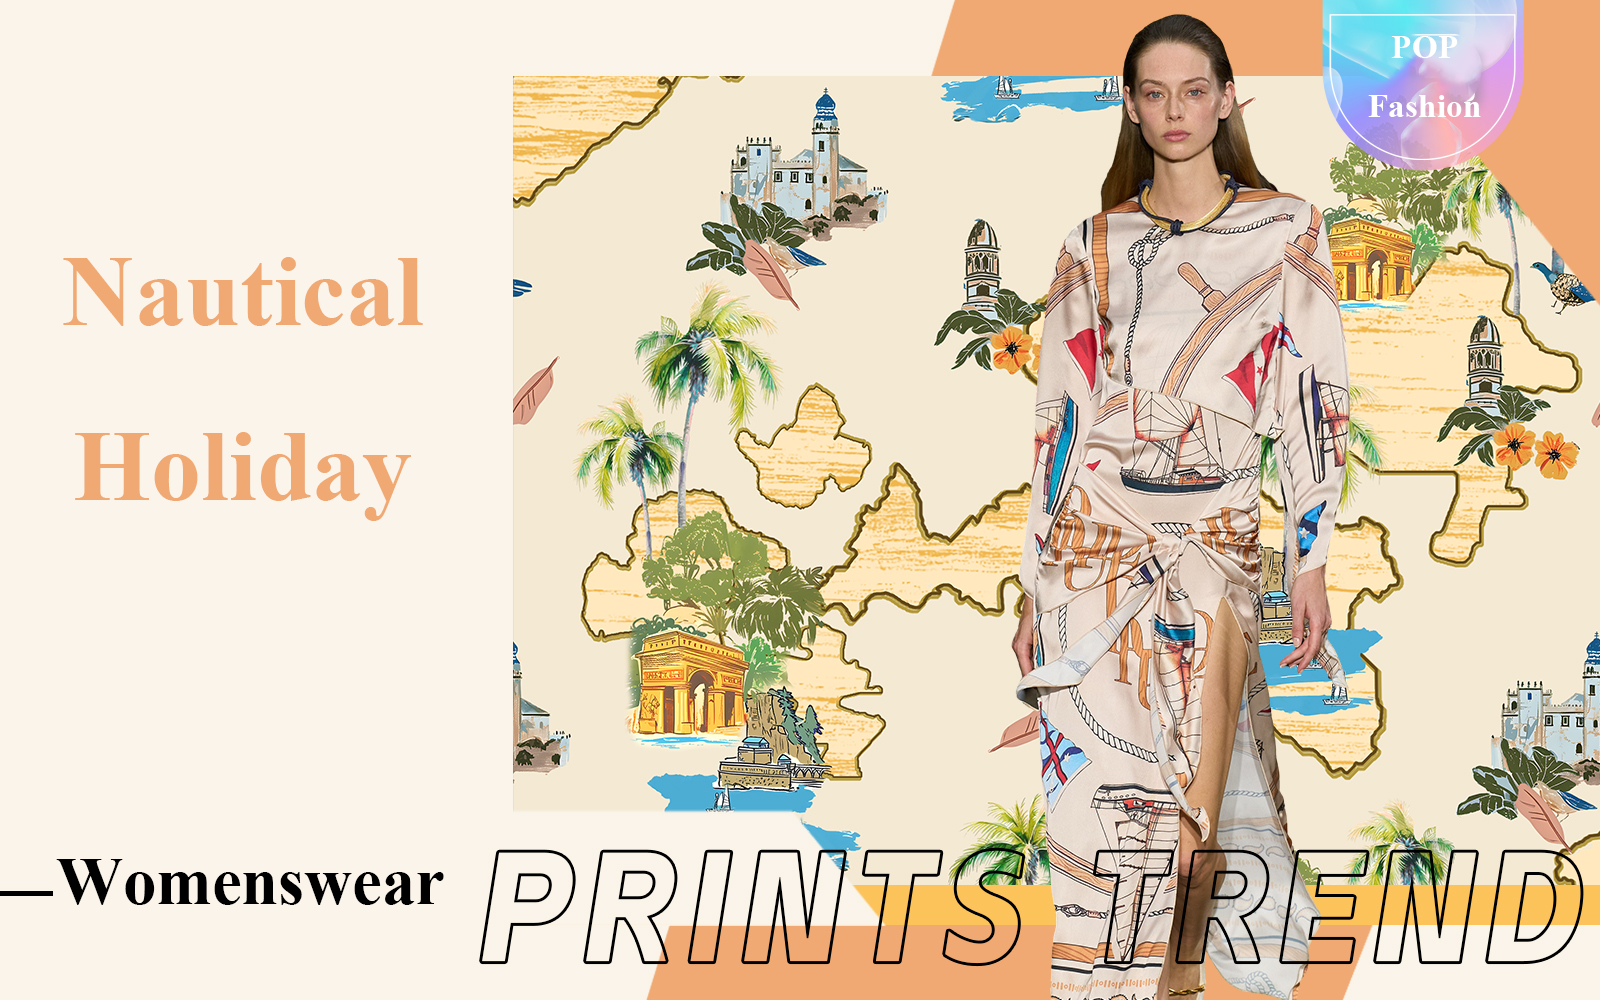 Nautical Holiday -- The Pattern Trend for Womenswear